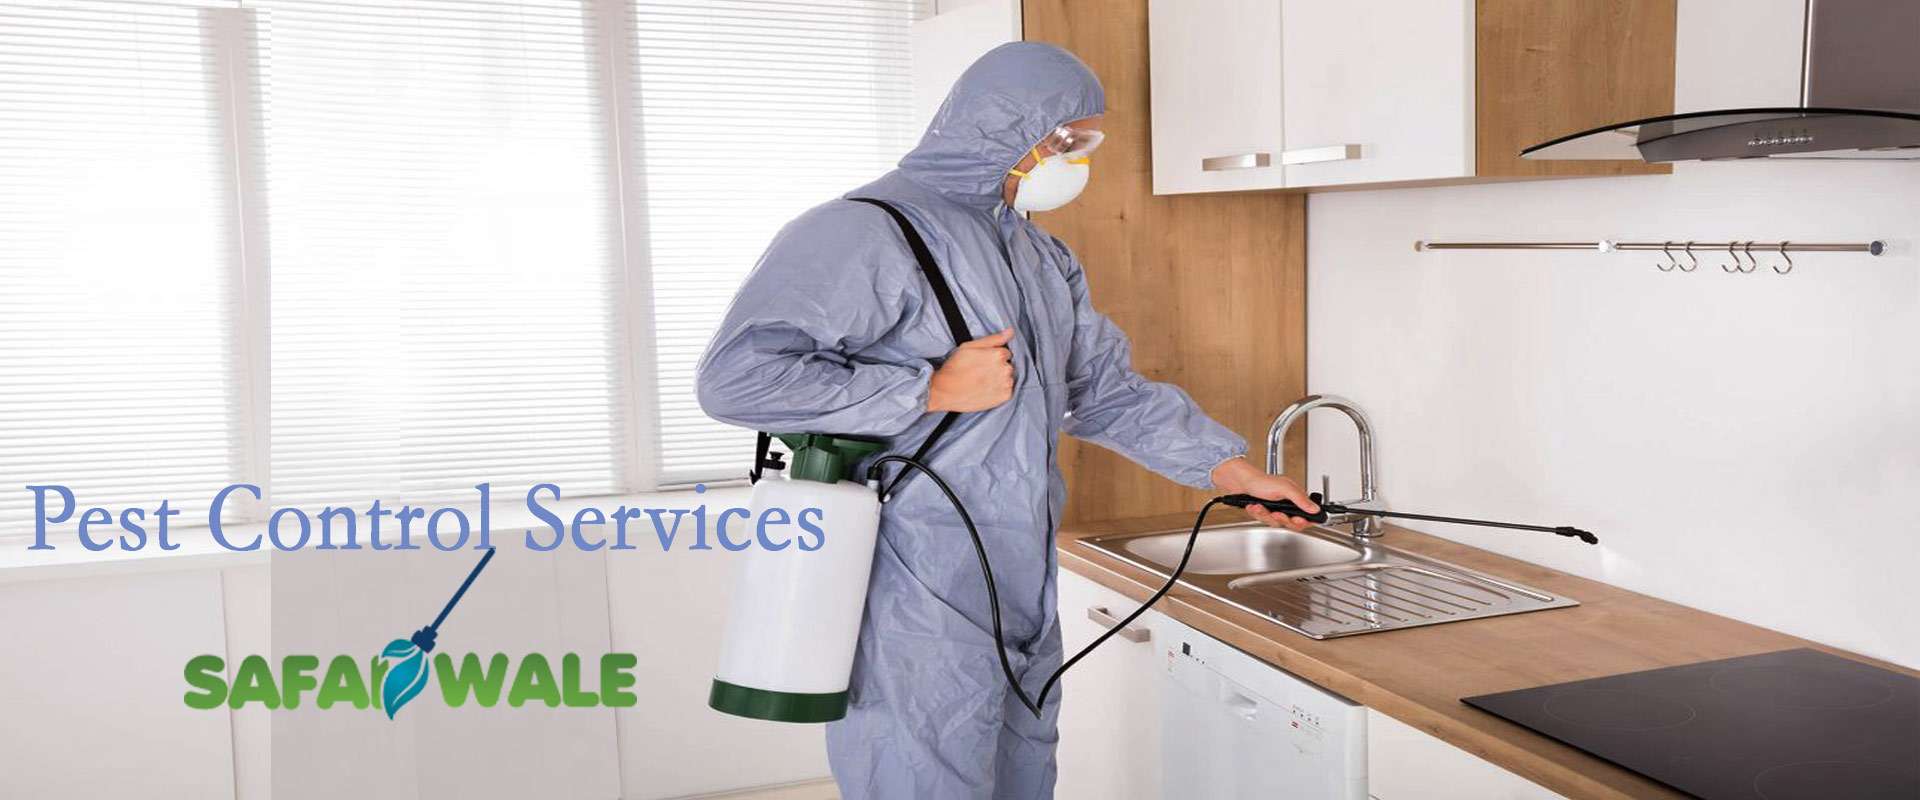 Pest Control Services In Ghaziabad-Safaiwale